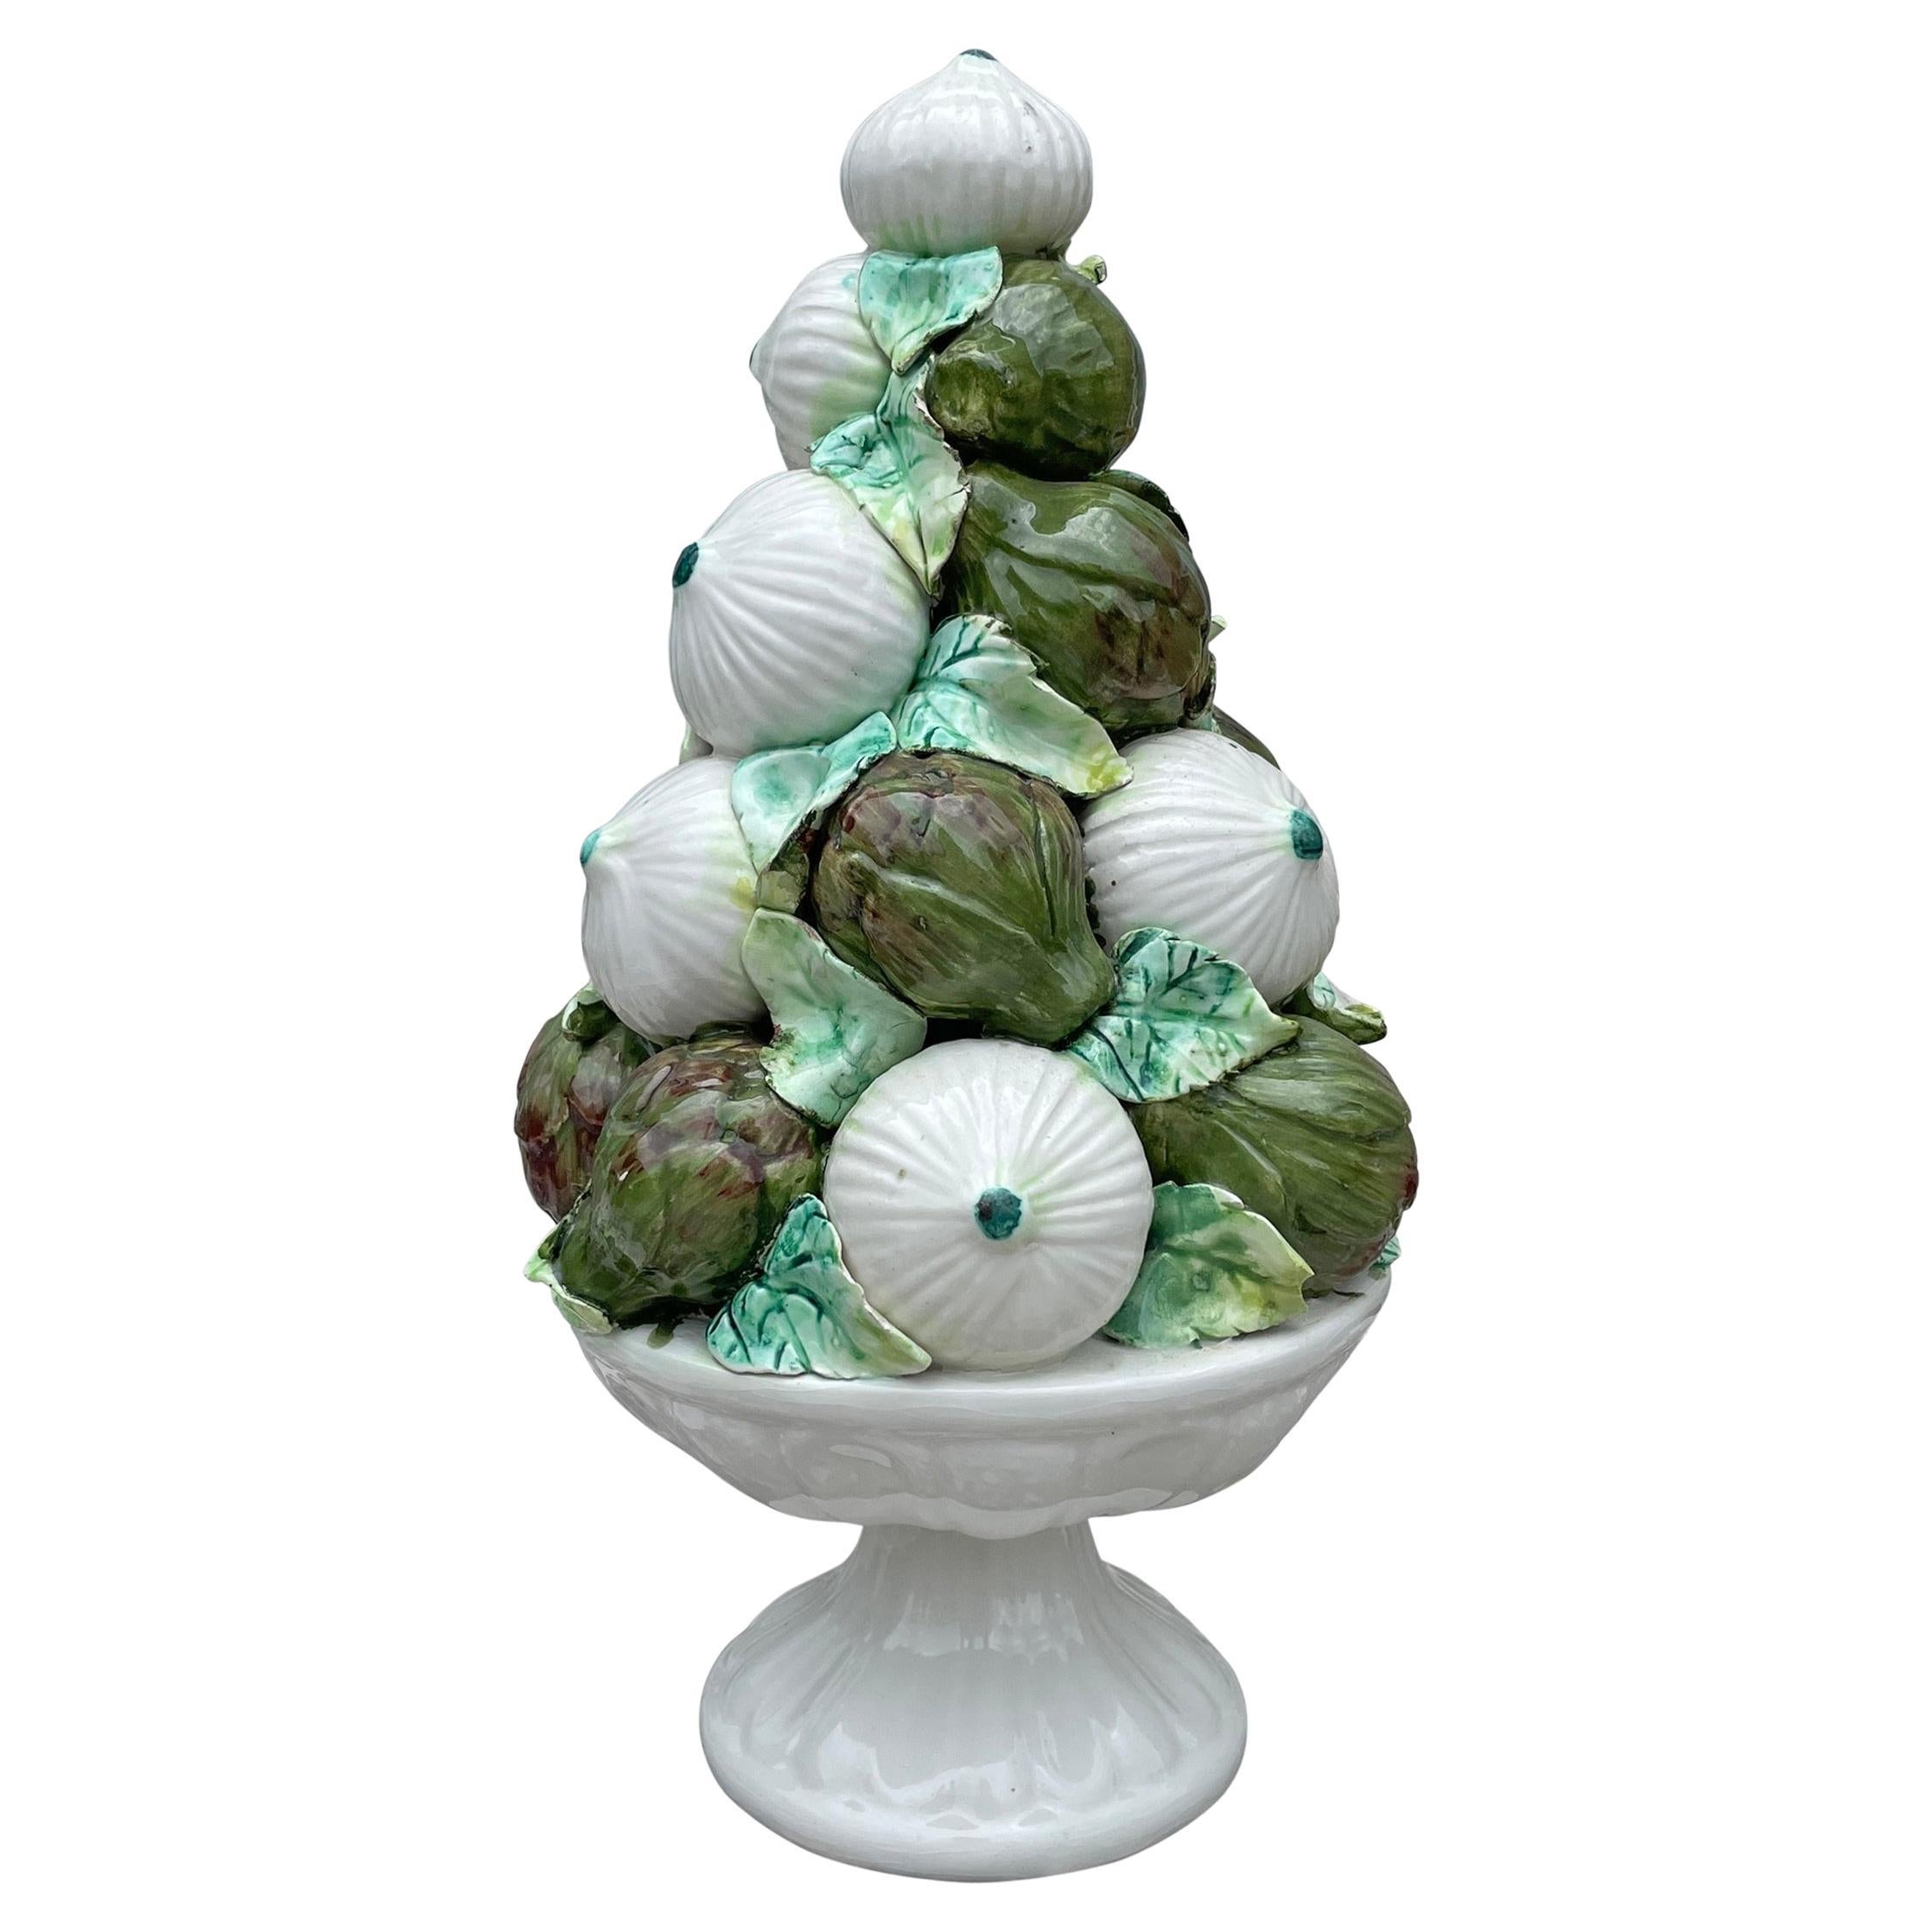 Vintage Italian Onion and Artichoke Finial Topiary For Sale